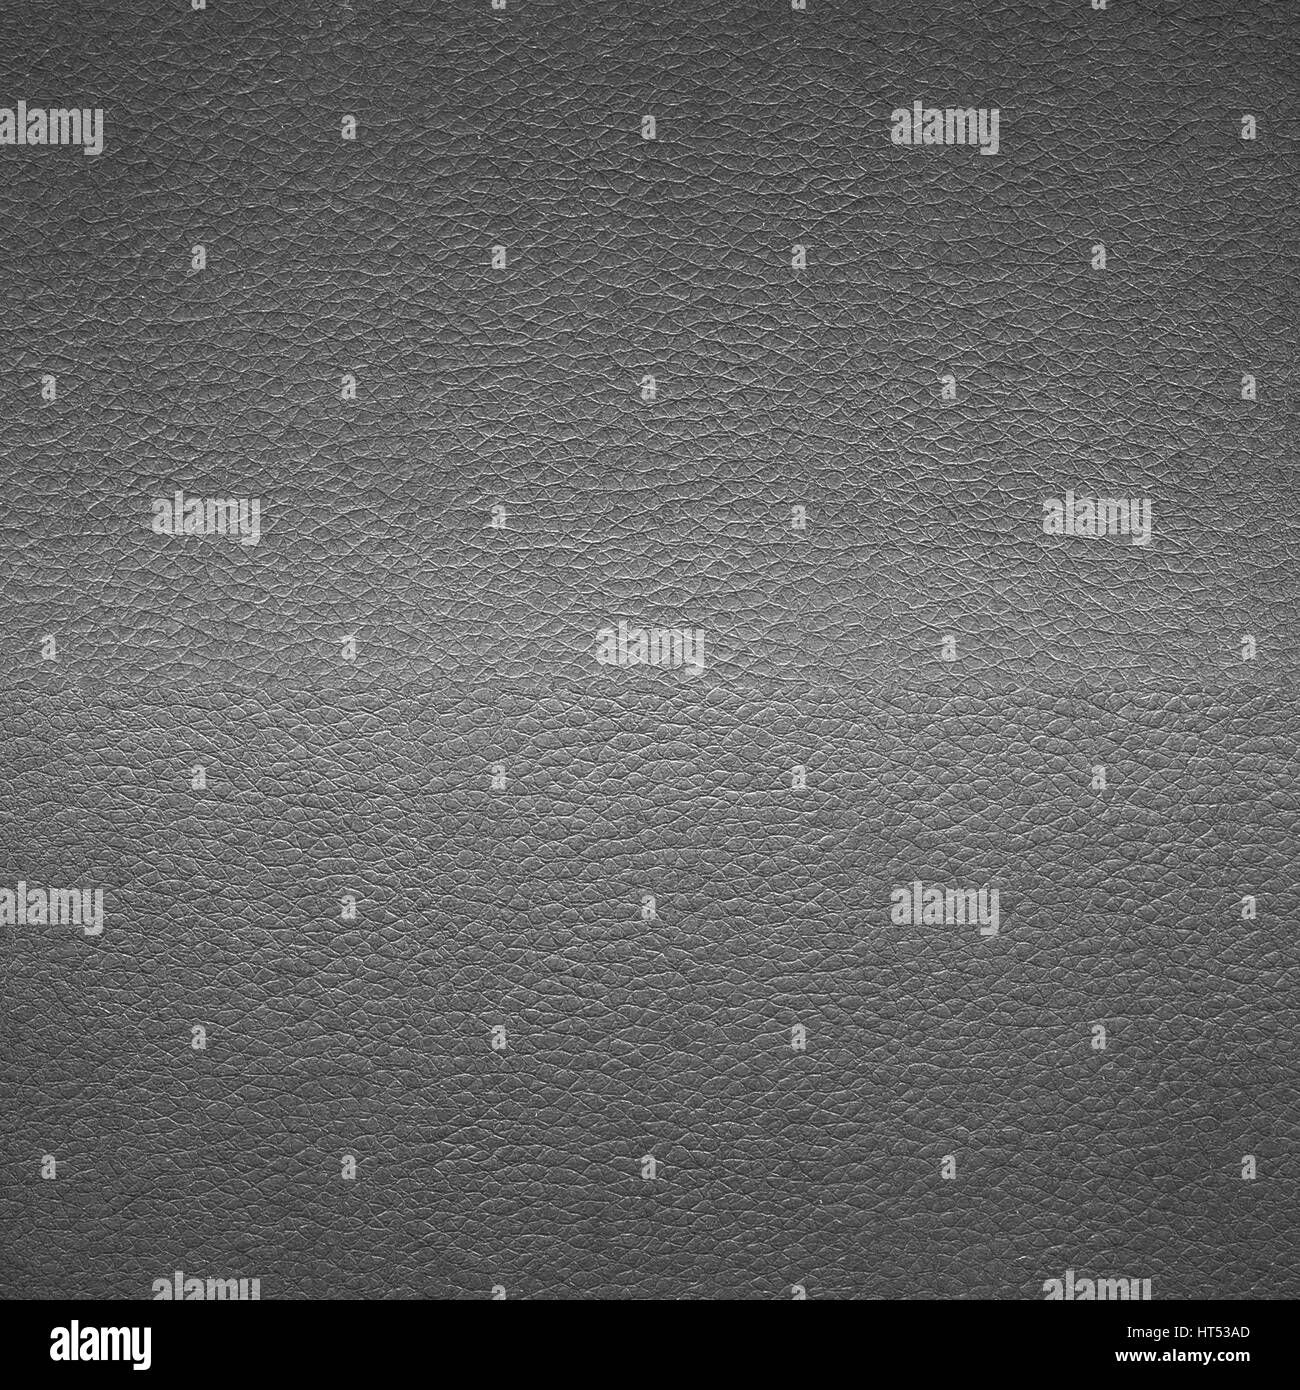 Black leather texture for background Stock Photo